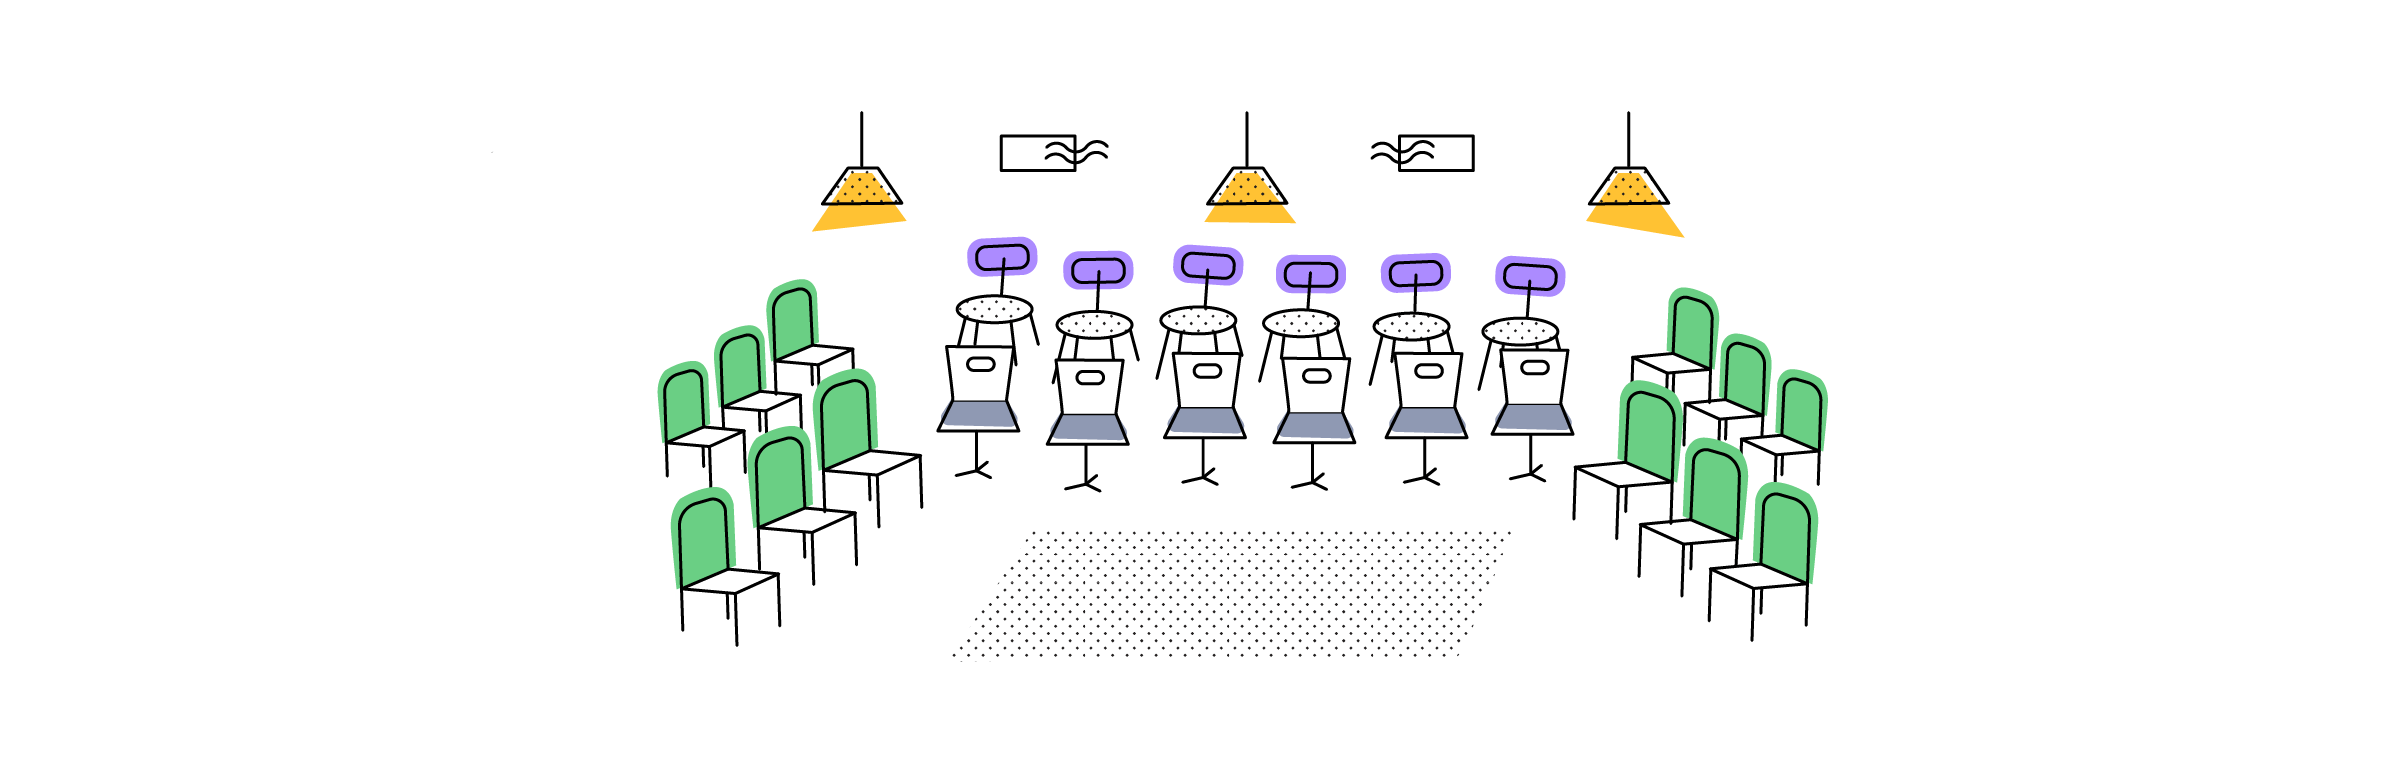 Chairs representing the seating positions during a business meeting